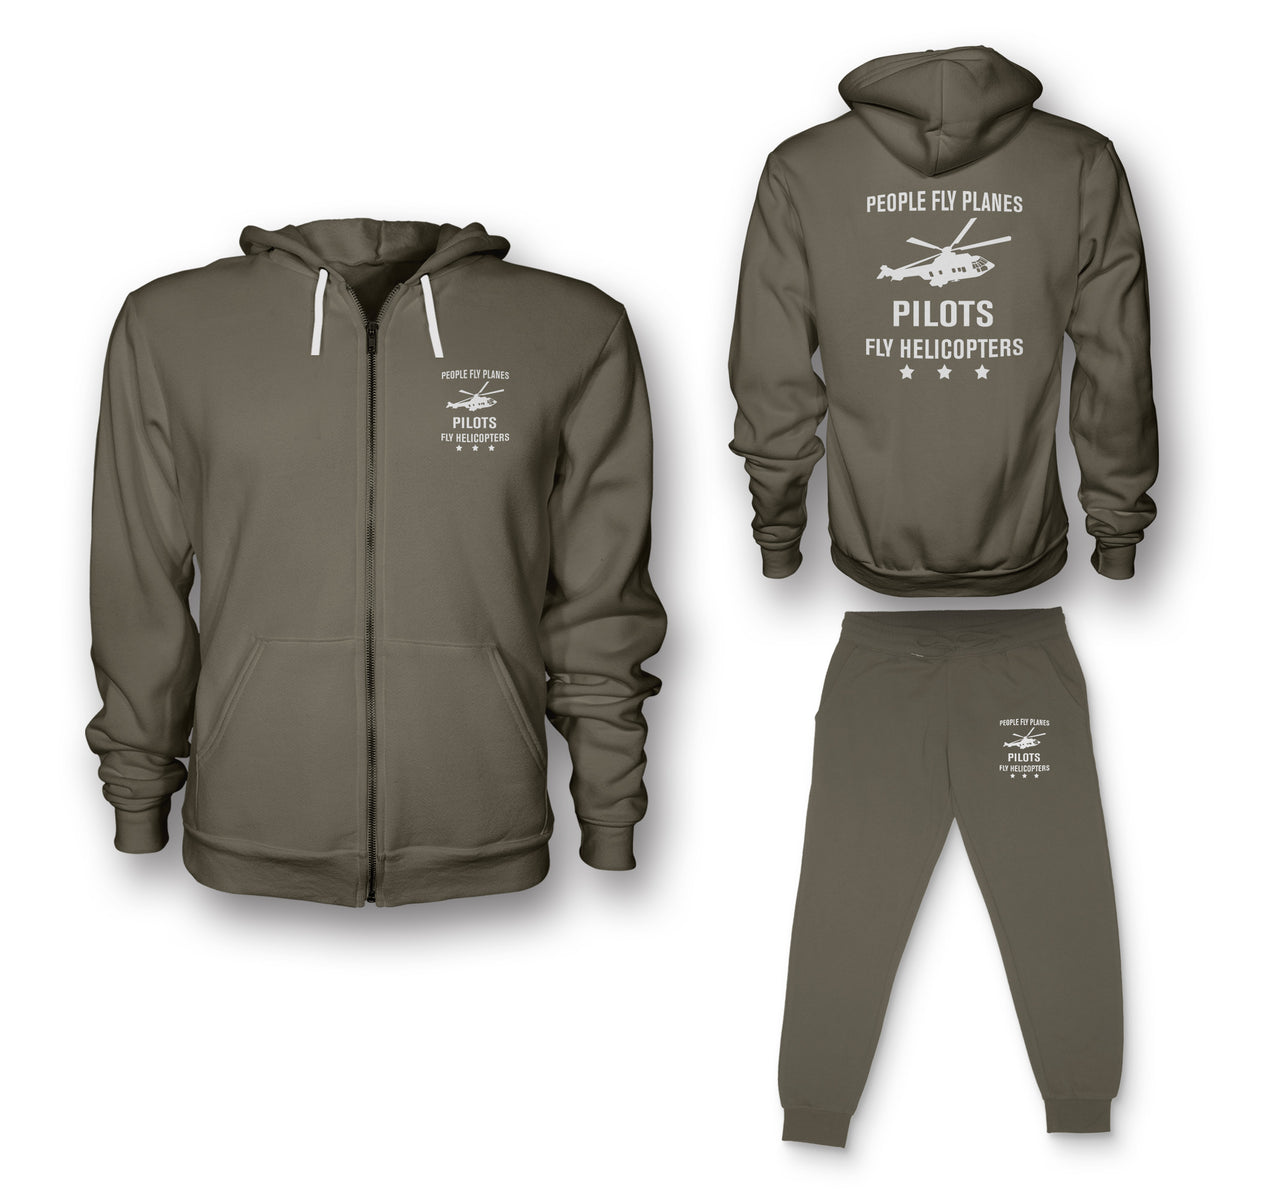 People Fly Planes Pilots Fly Helicopters Designed Zipped Hoodies & Sweatpants Set